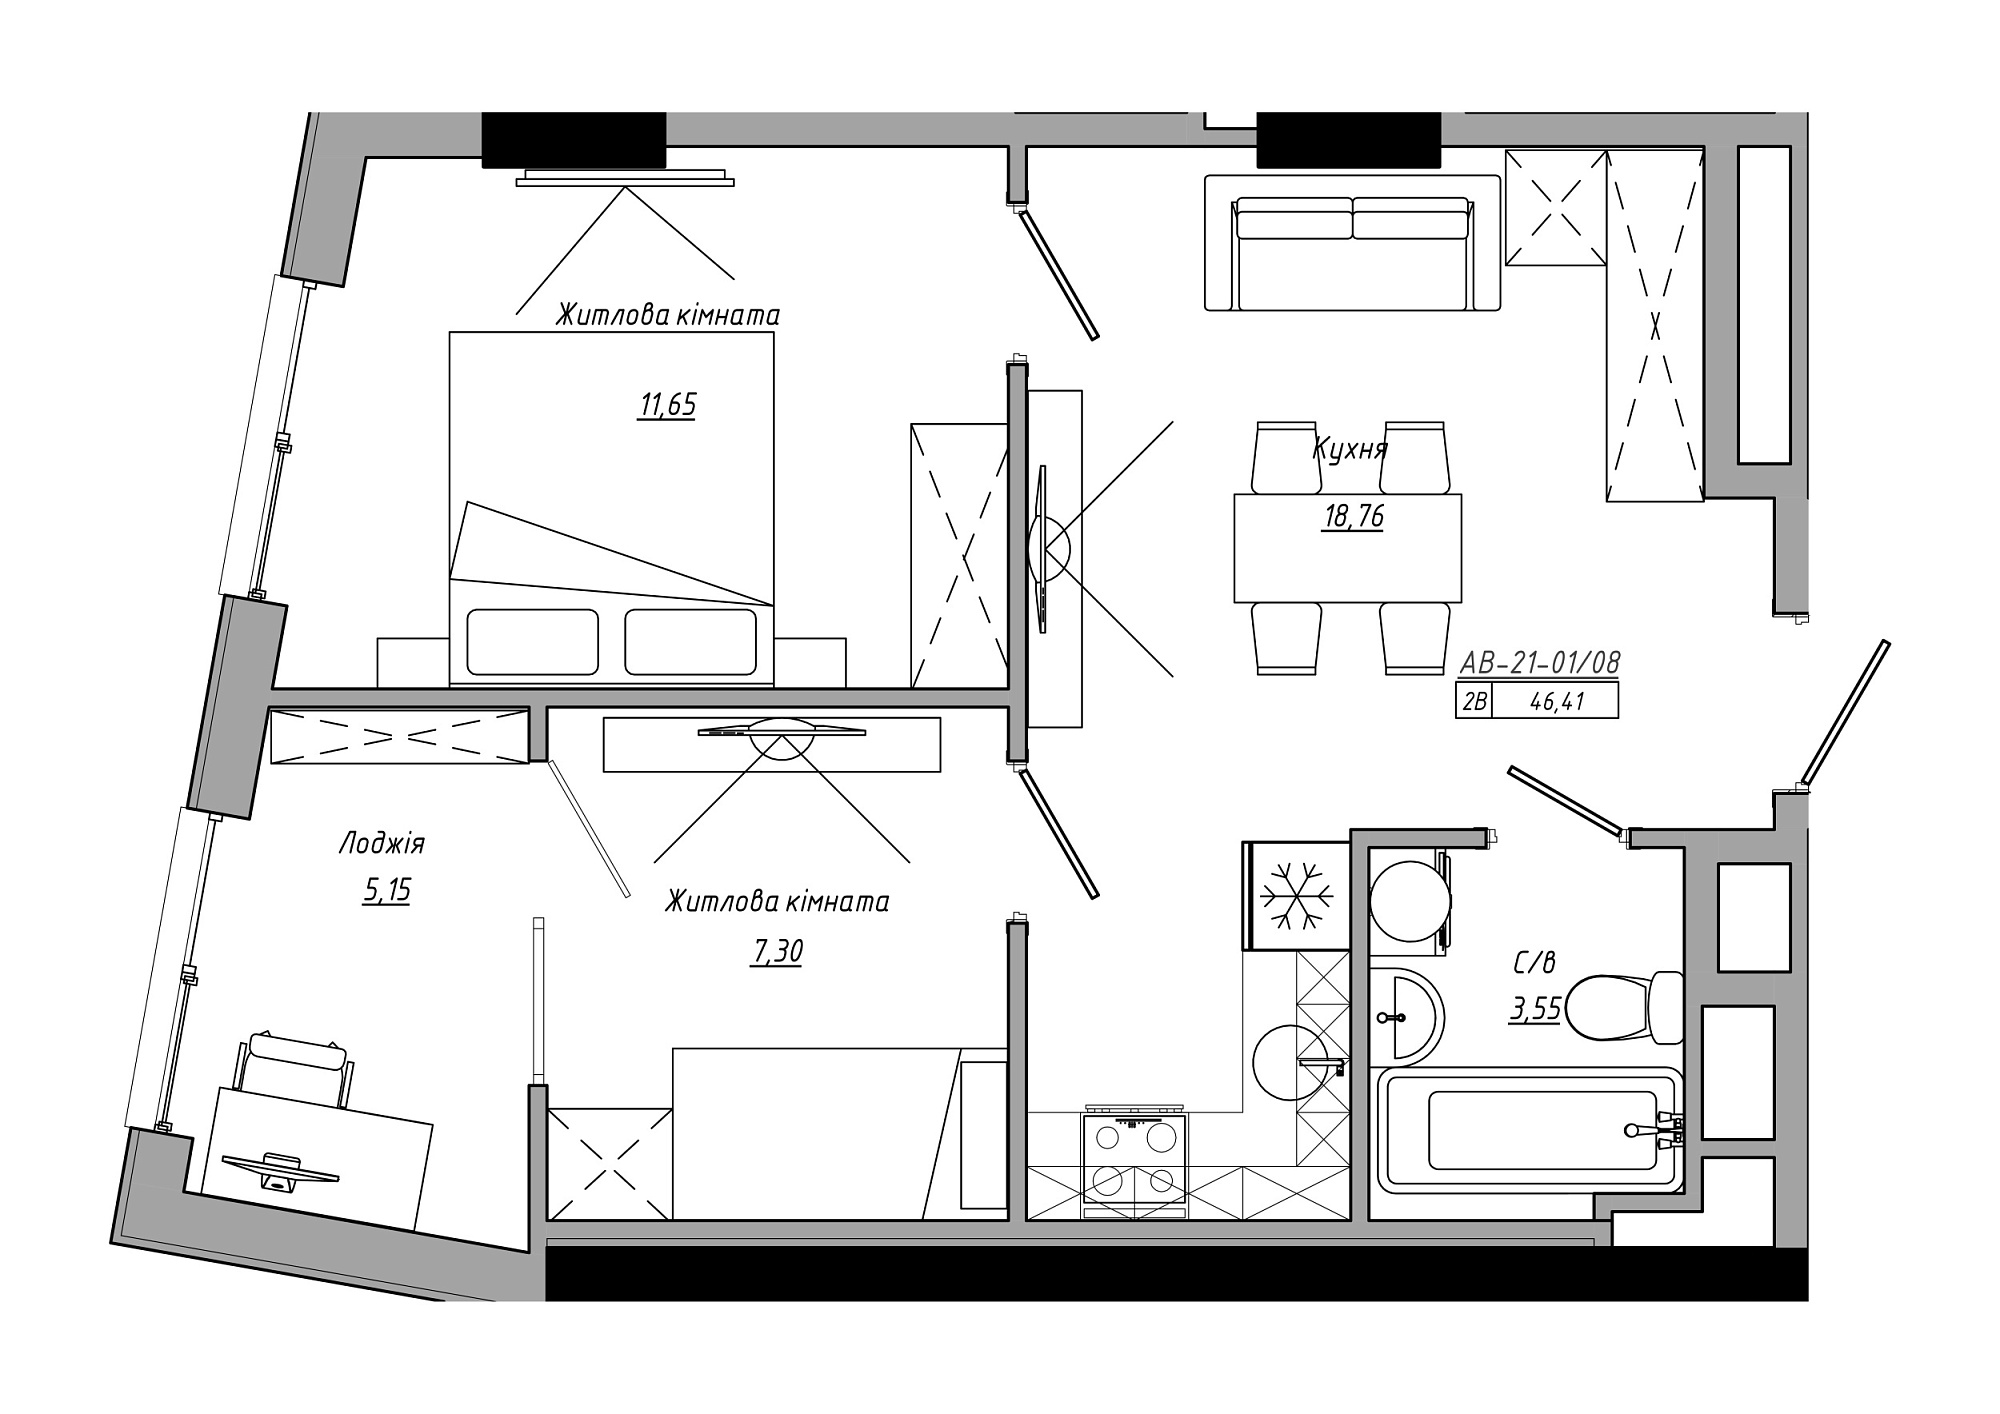 Planning 2-rm flats area 46.41m2, AB-21-01/00008.